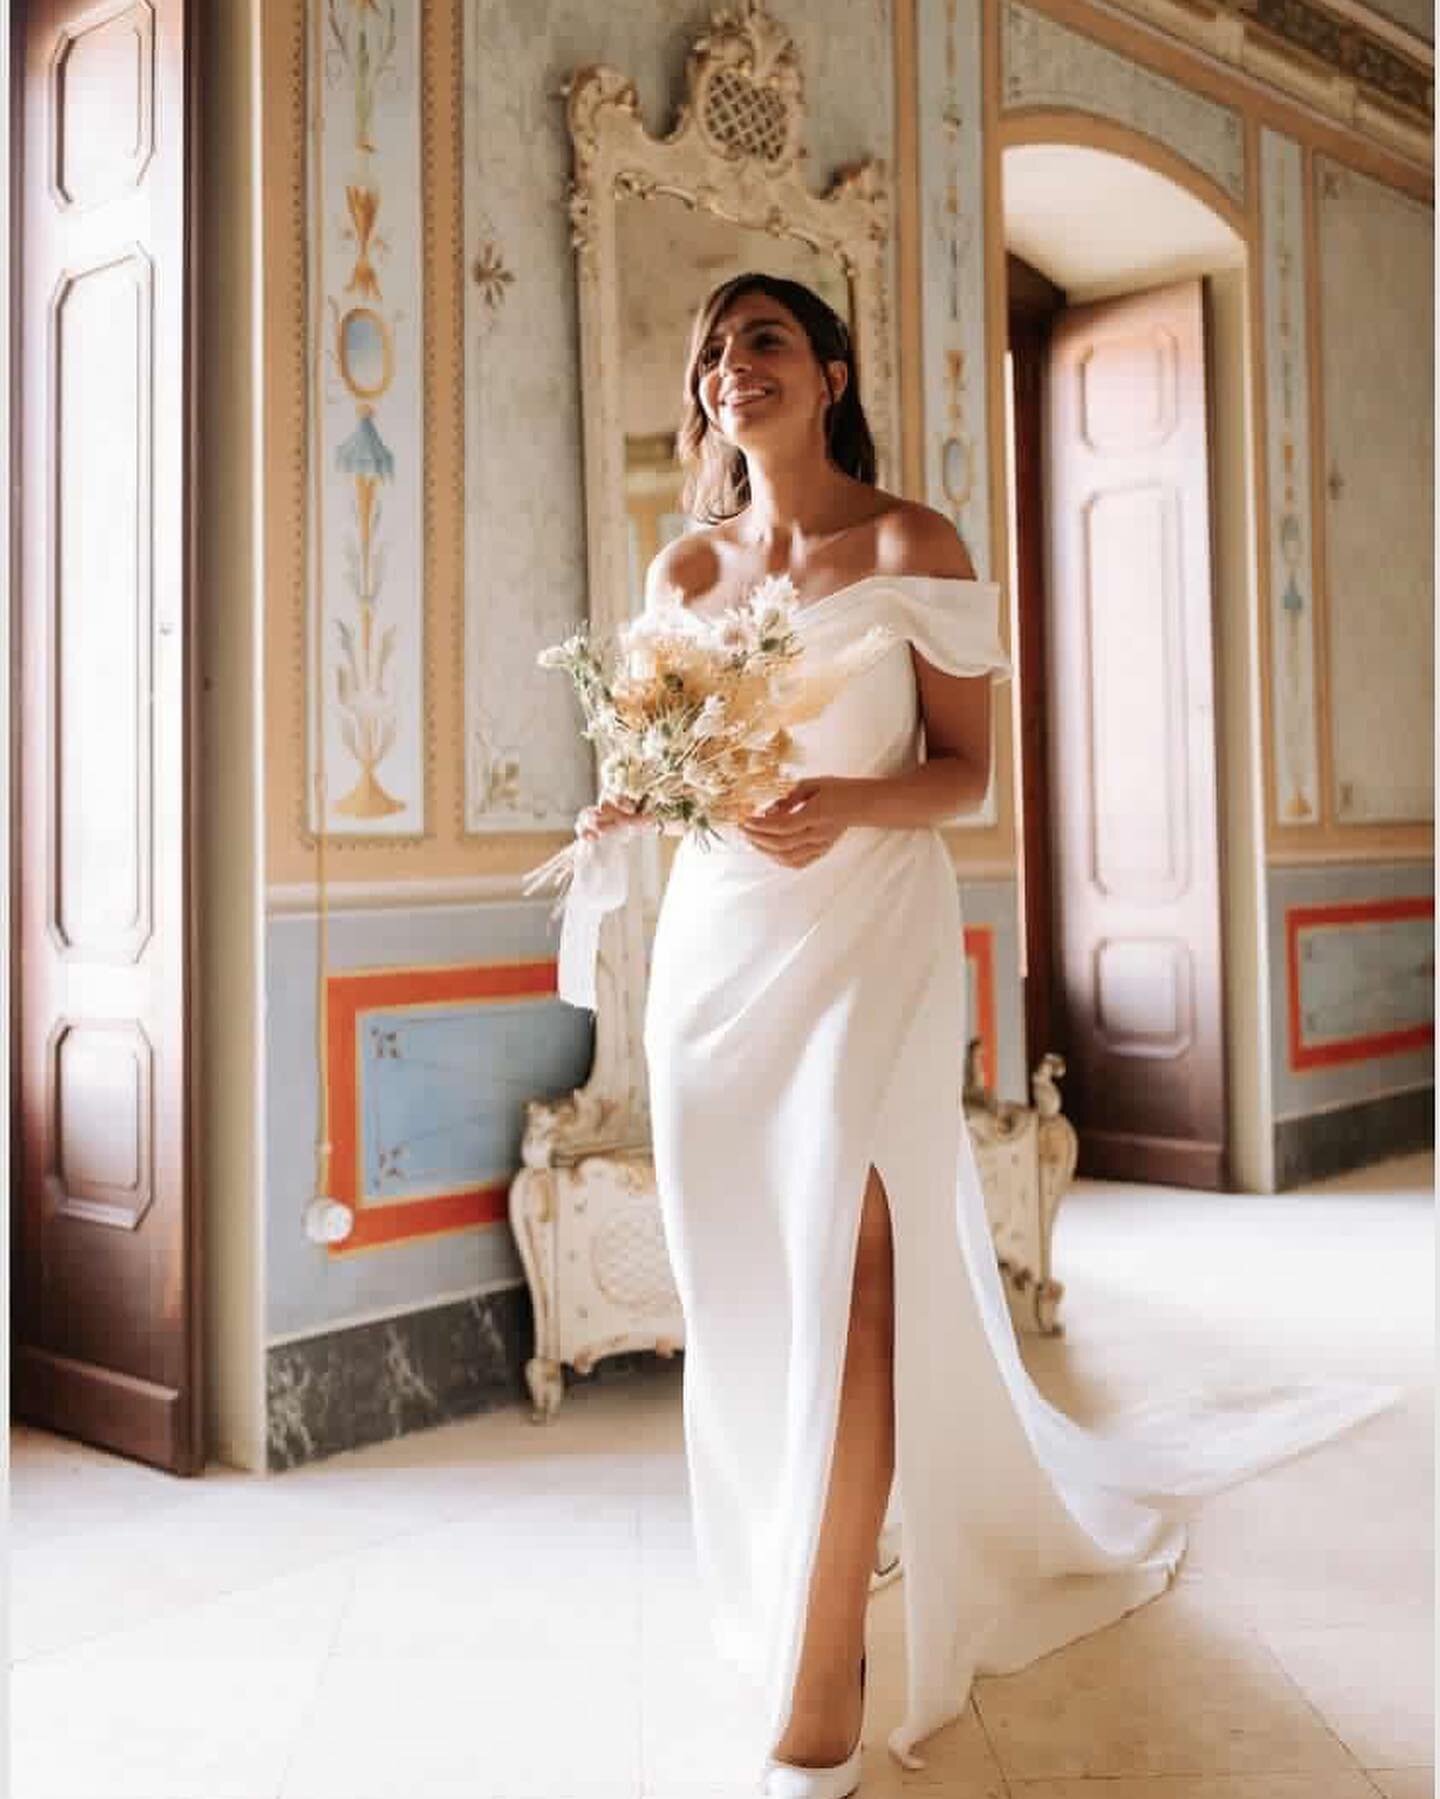 Real bride | Angela @angelaschiraldi_ ✨ Nothing beats the natural smile &amp; these beautiful moments of our brides on their wedding day.  So overjoyed for you!  Angela just breathtaking in her @halfpennylondon style.
Congrats to the gorgeous couple!